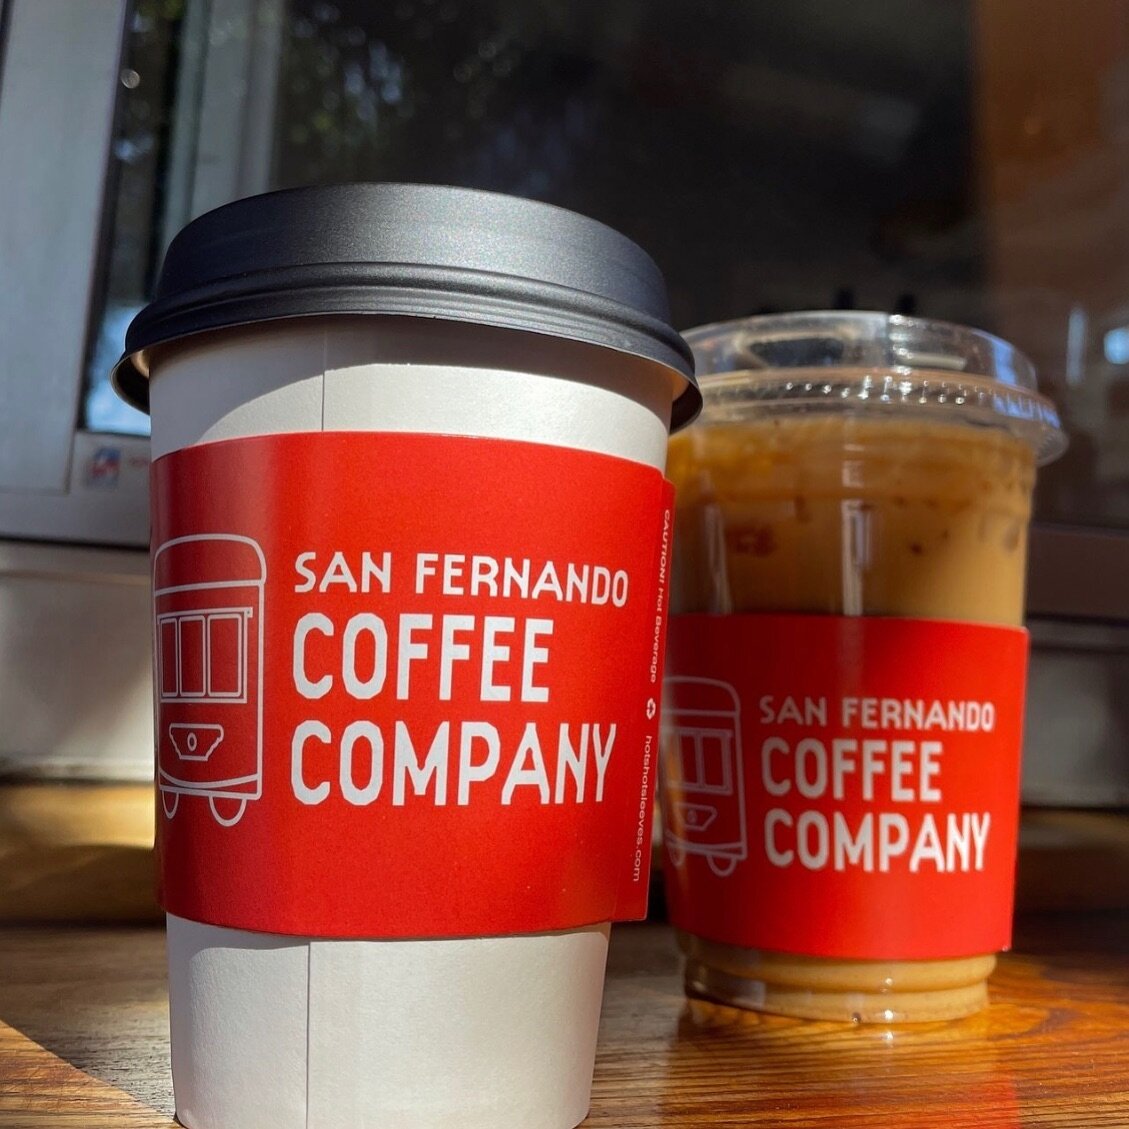 Happy Friday San Fernando🌴 
start your morning off strong with a cup of coffee from @sanfernandocoffeeco ☕️ 

Shop local and support small businesses🛍️
#downtownsanfernando #coffeetime #downtown #explore #morningcupofjoe #localcoffeeshop